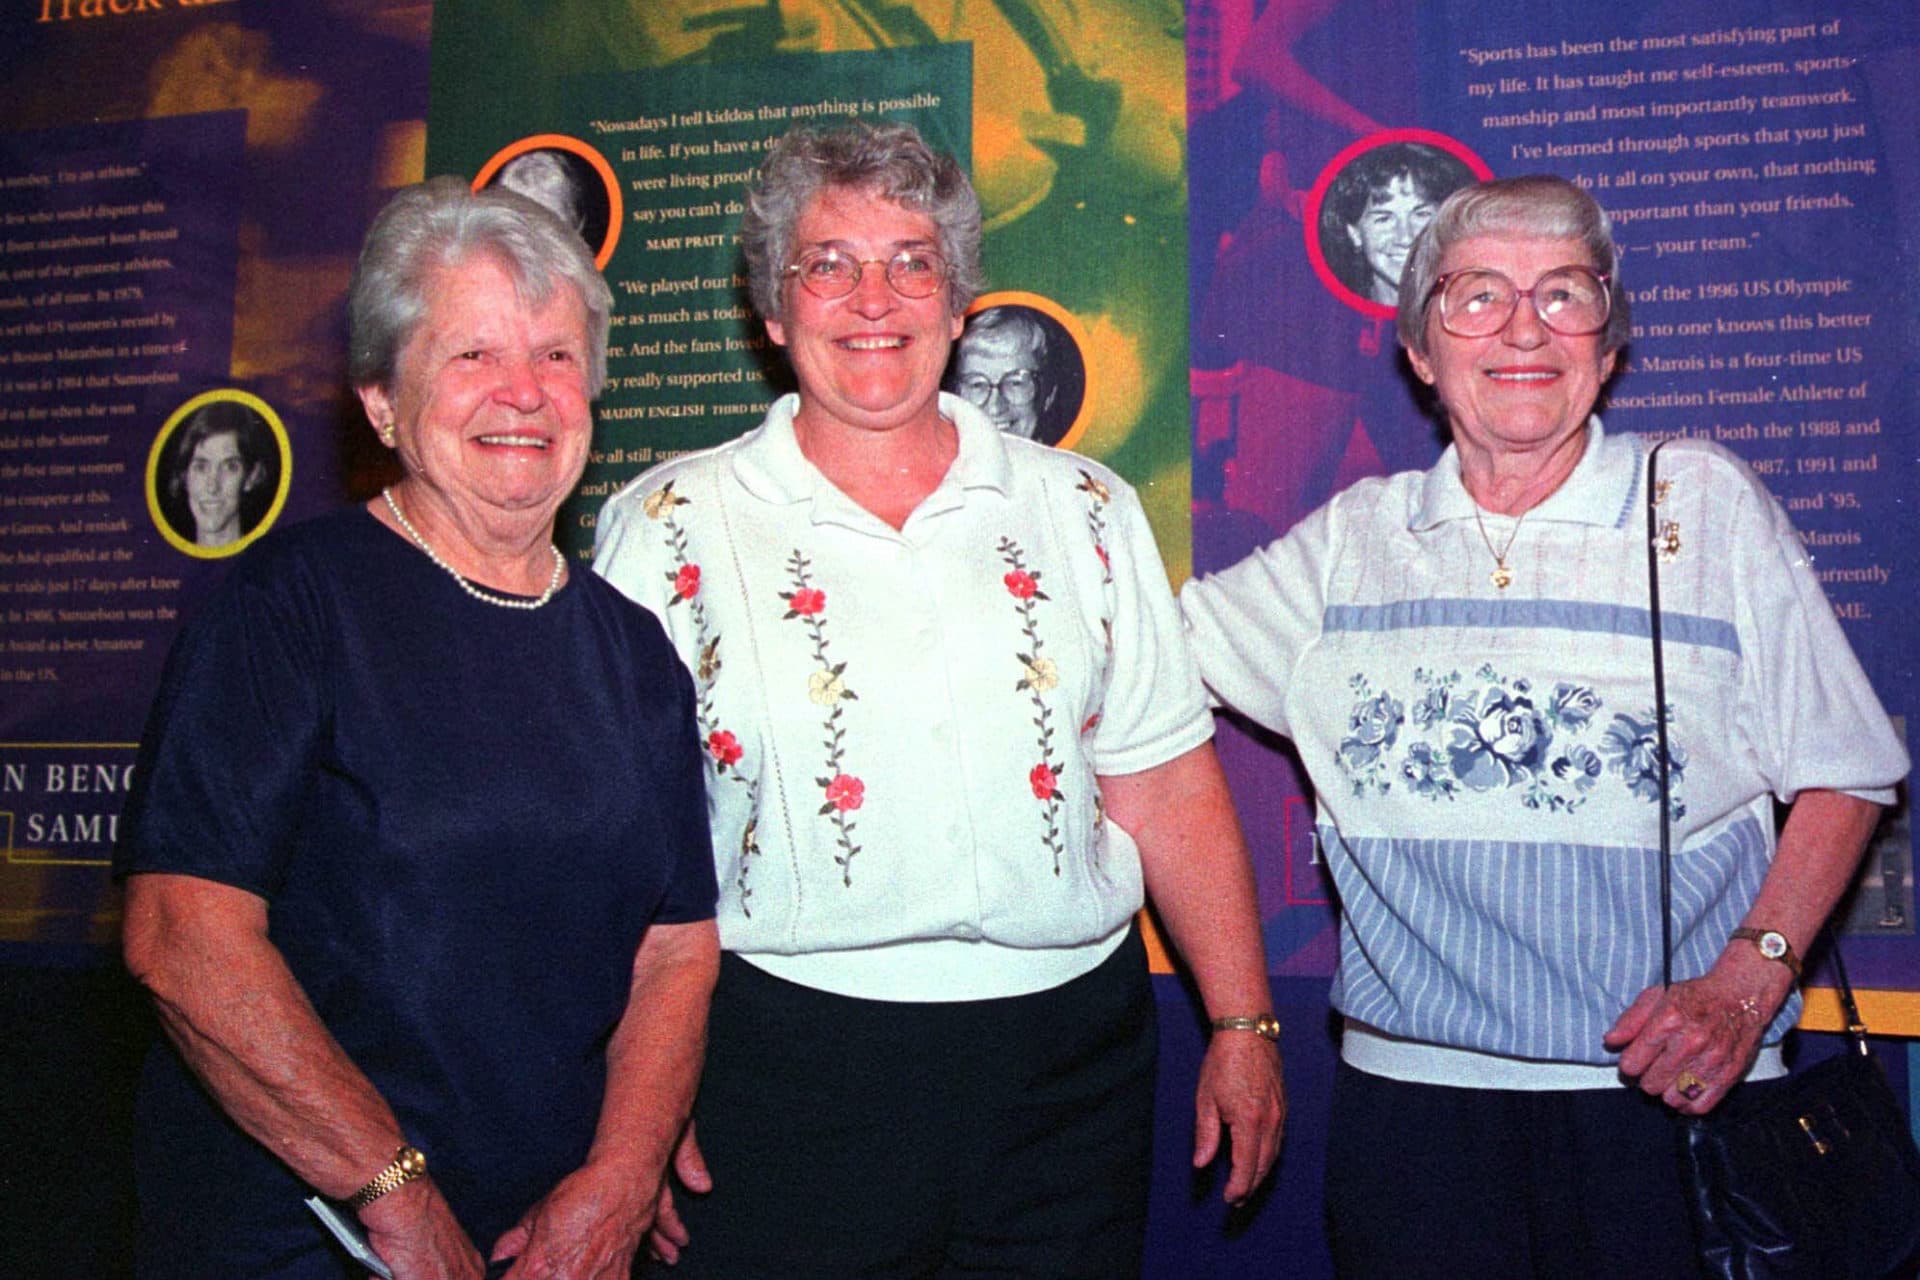 Former women's professional baseball players Mary Pratt, left, of Quincy, Mass., and Maddy English, right, of Everett, Mass., are joined by their friend Marie Cronin, center, at the opening of the New England Women's Sports Hall of Fame in Saugus, Mass. Pratt and English were members of the All-American Girls Professional Baseball League in the 1940s. (AP Photo/Steven Tackeff, File)